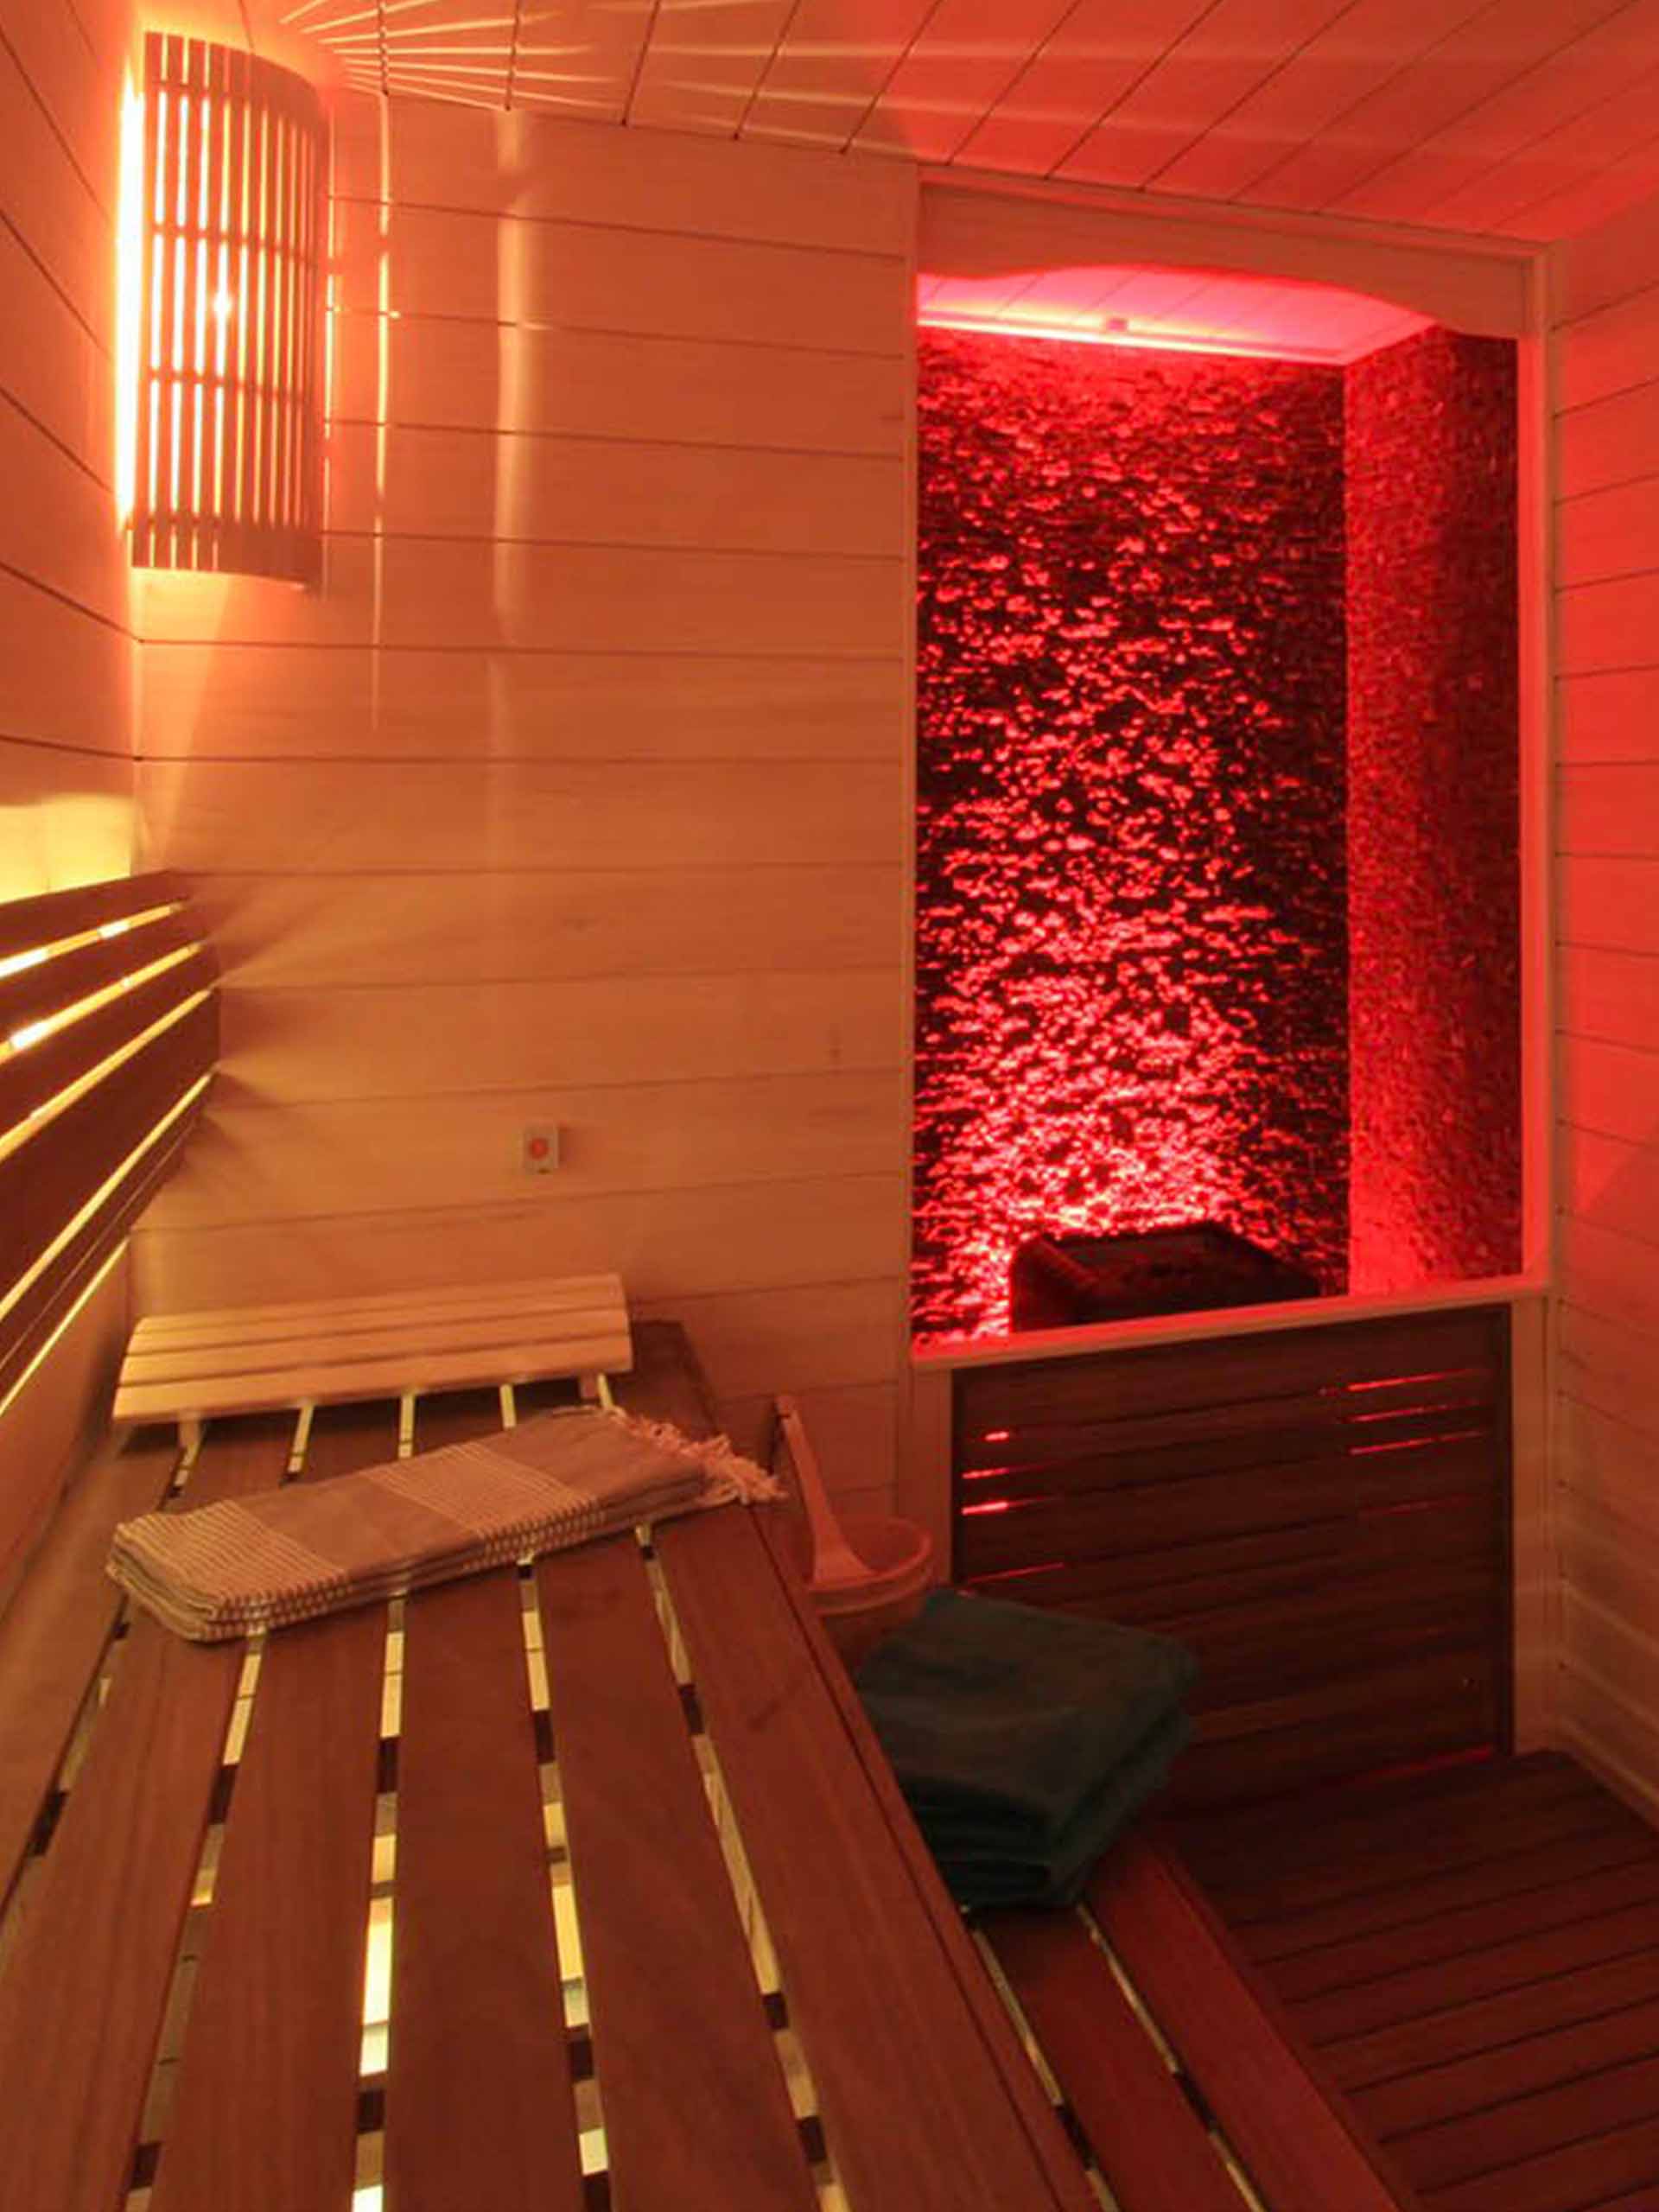 Nürnberg Sauna – Unveil the art of relaxation. Buy and build this masterpiece by Sauna Dekor, where visionary design meets a reasonable cost.